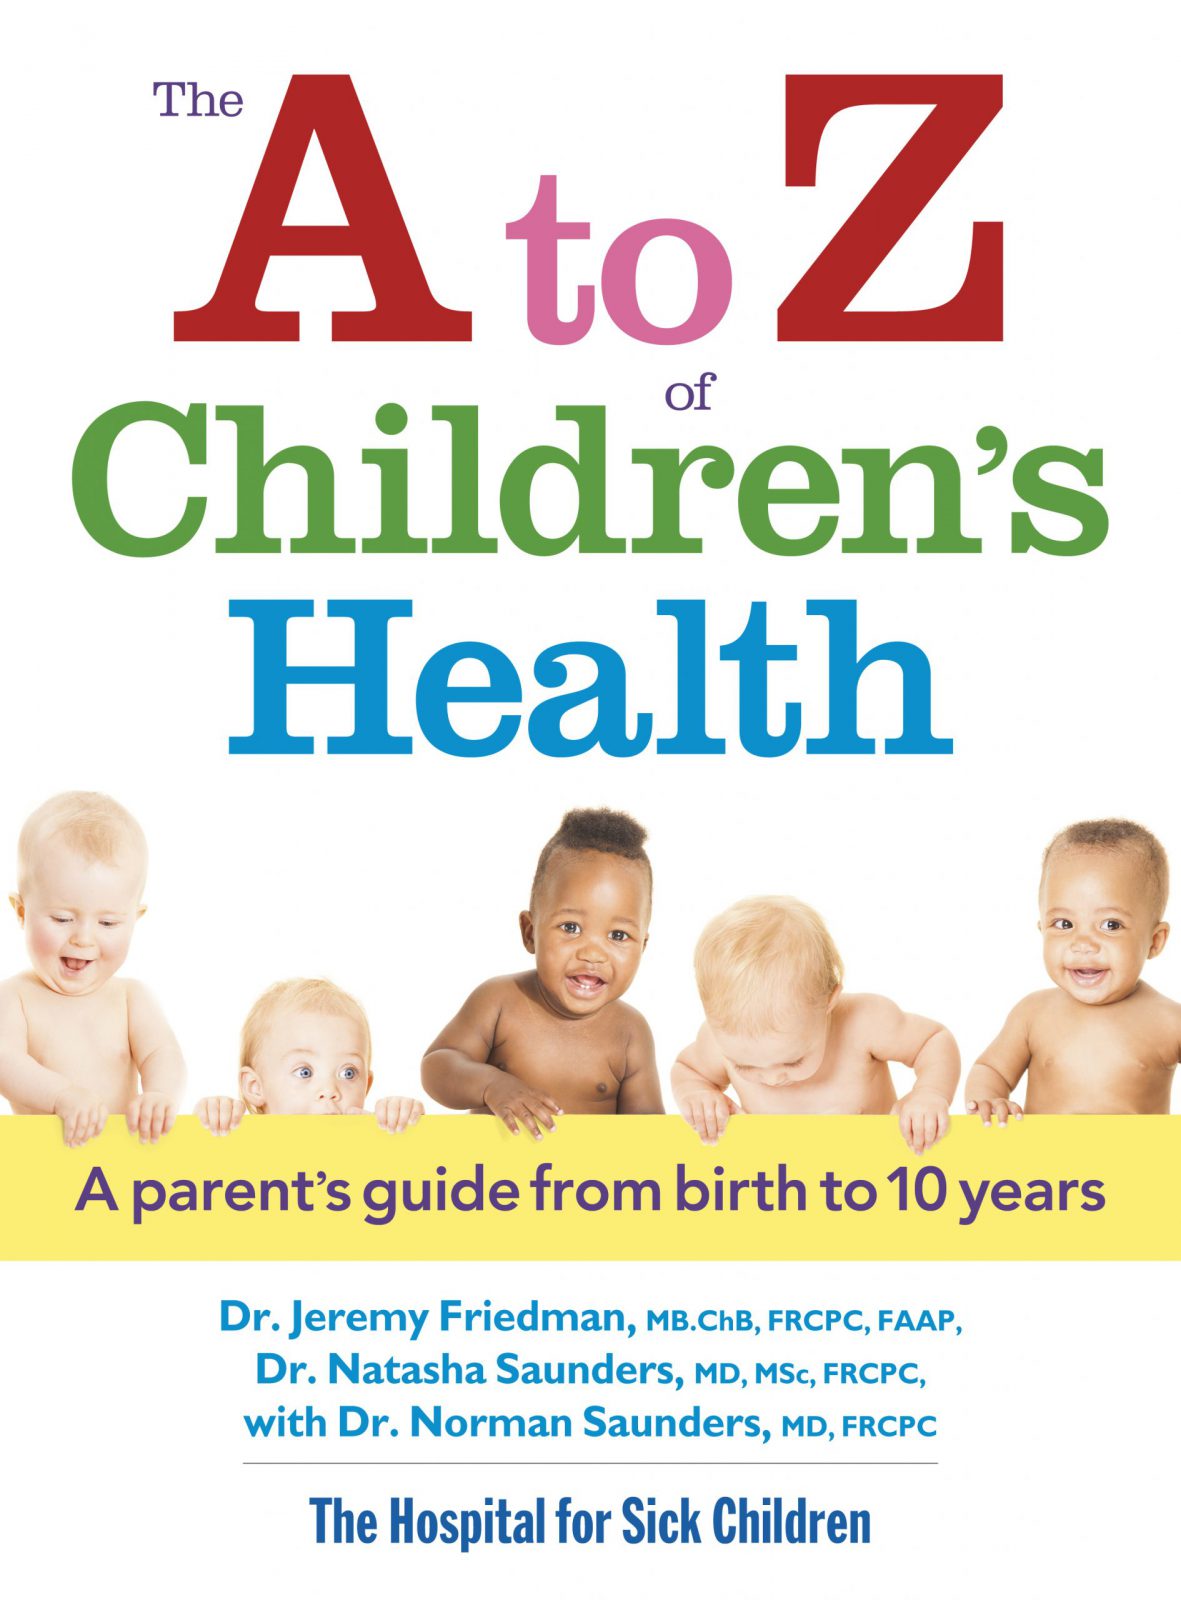 The A to Z of Children’s Health